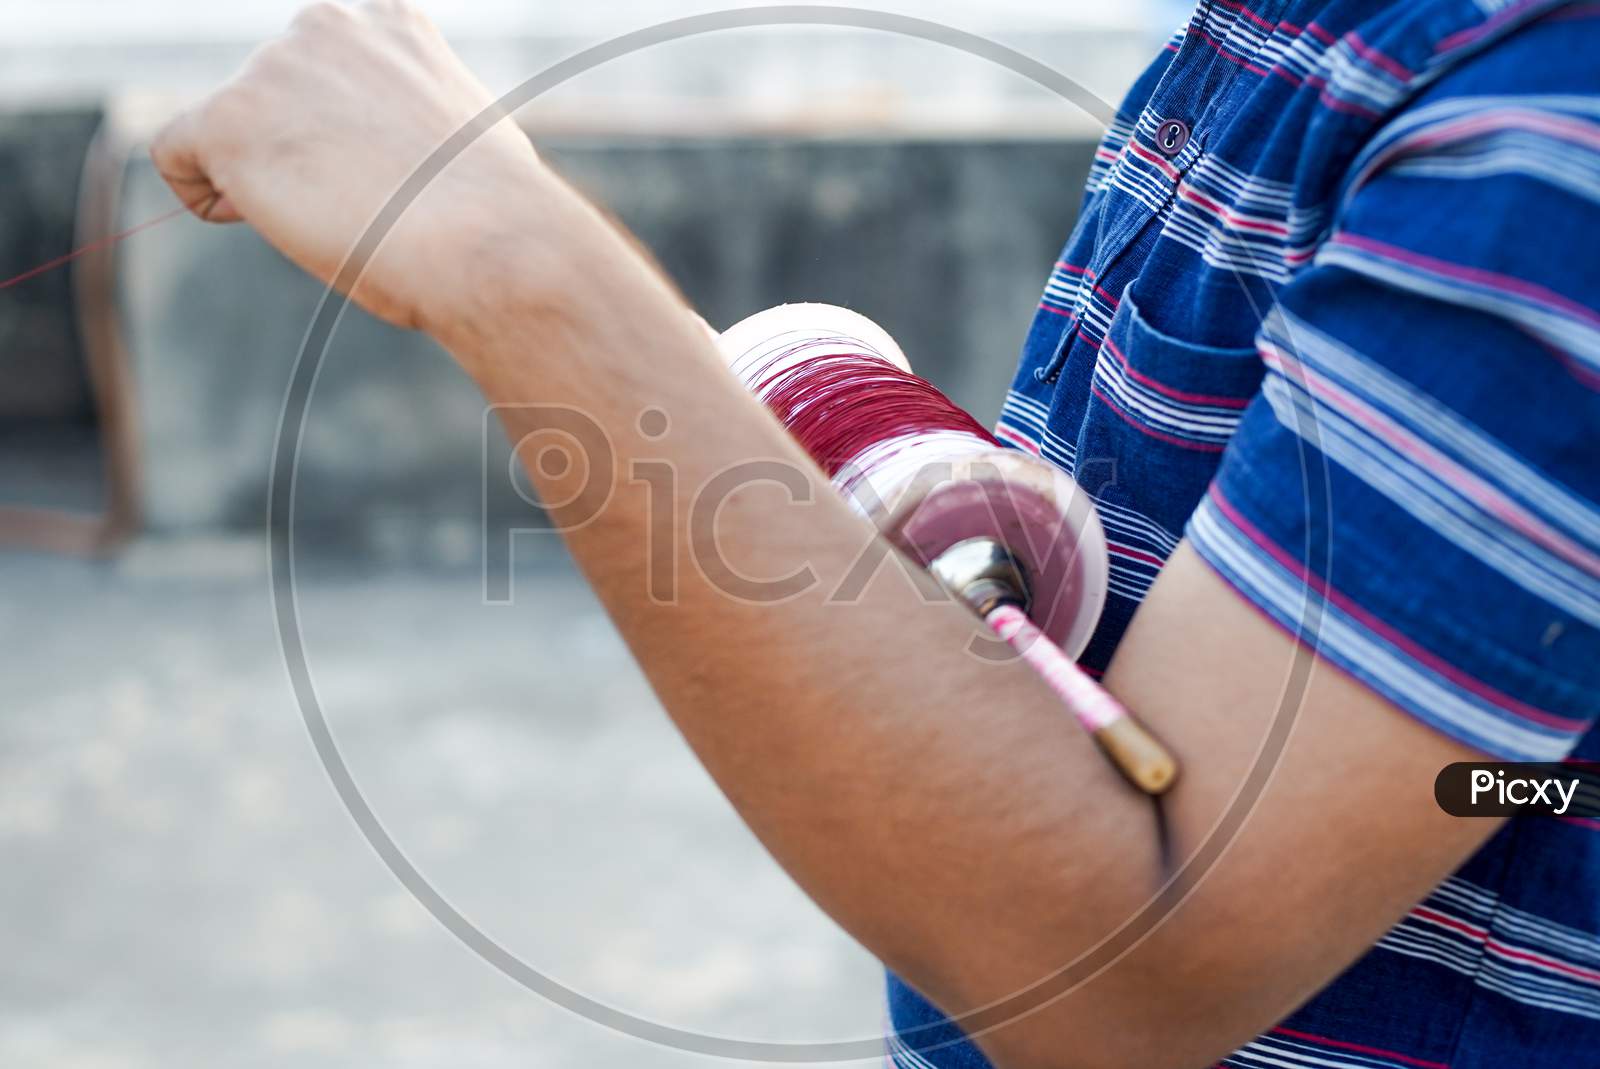 Man Holding A Charki Phirki Thread Spool In The Crook Of His Elbow And Winding It With The Other Hand To Ensure Taughtness For The Famed Kite Fighting Festival Of Makar Sankranti Uttarayana